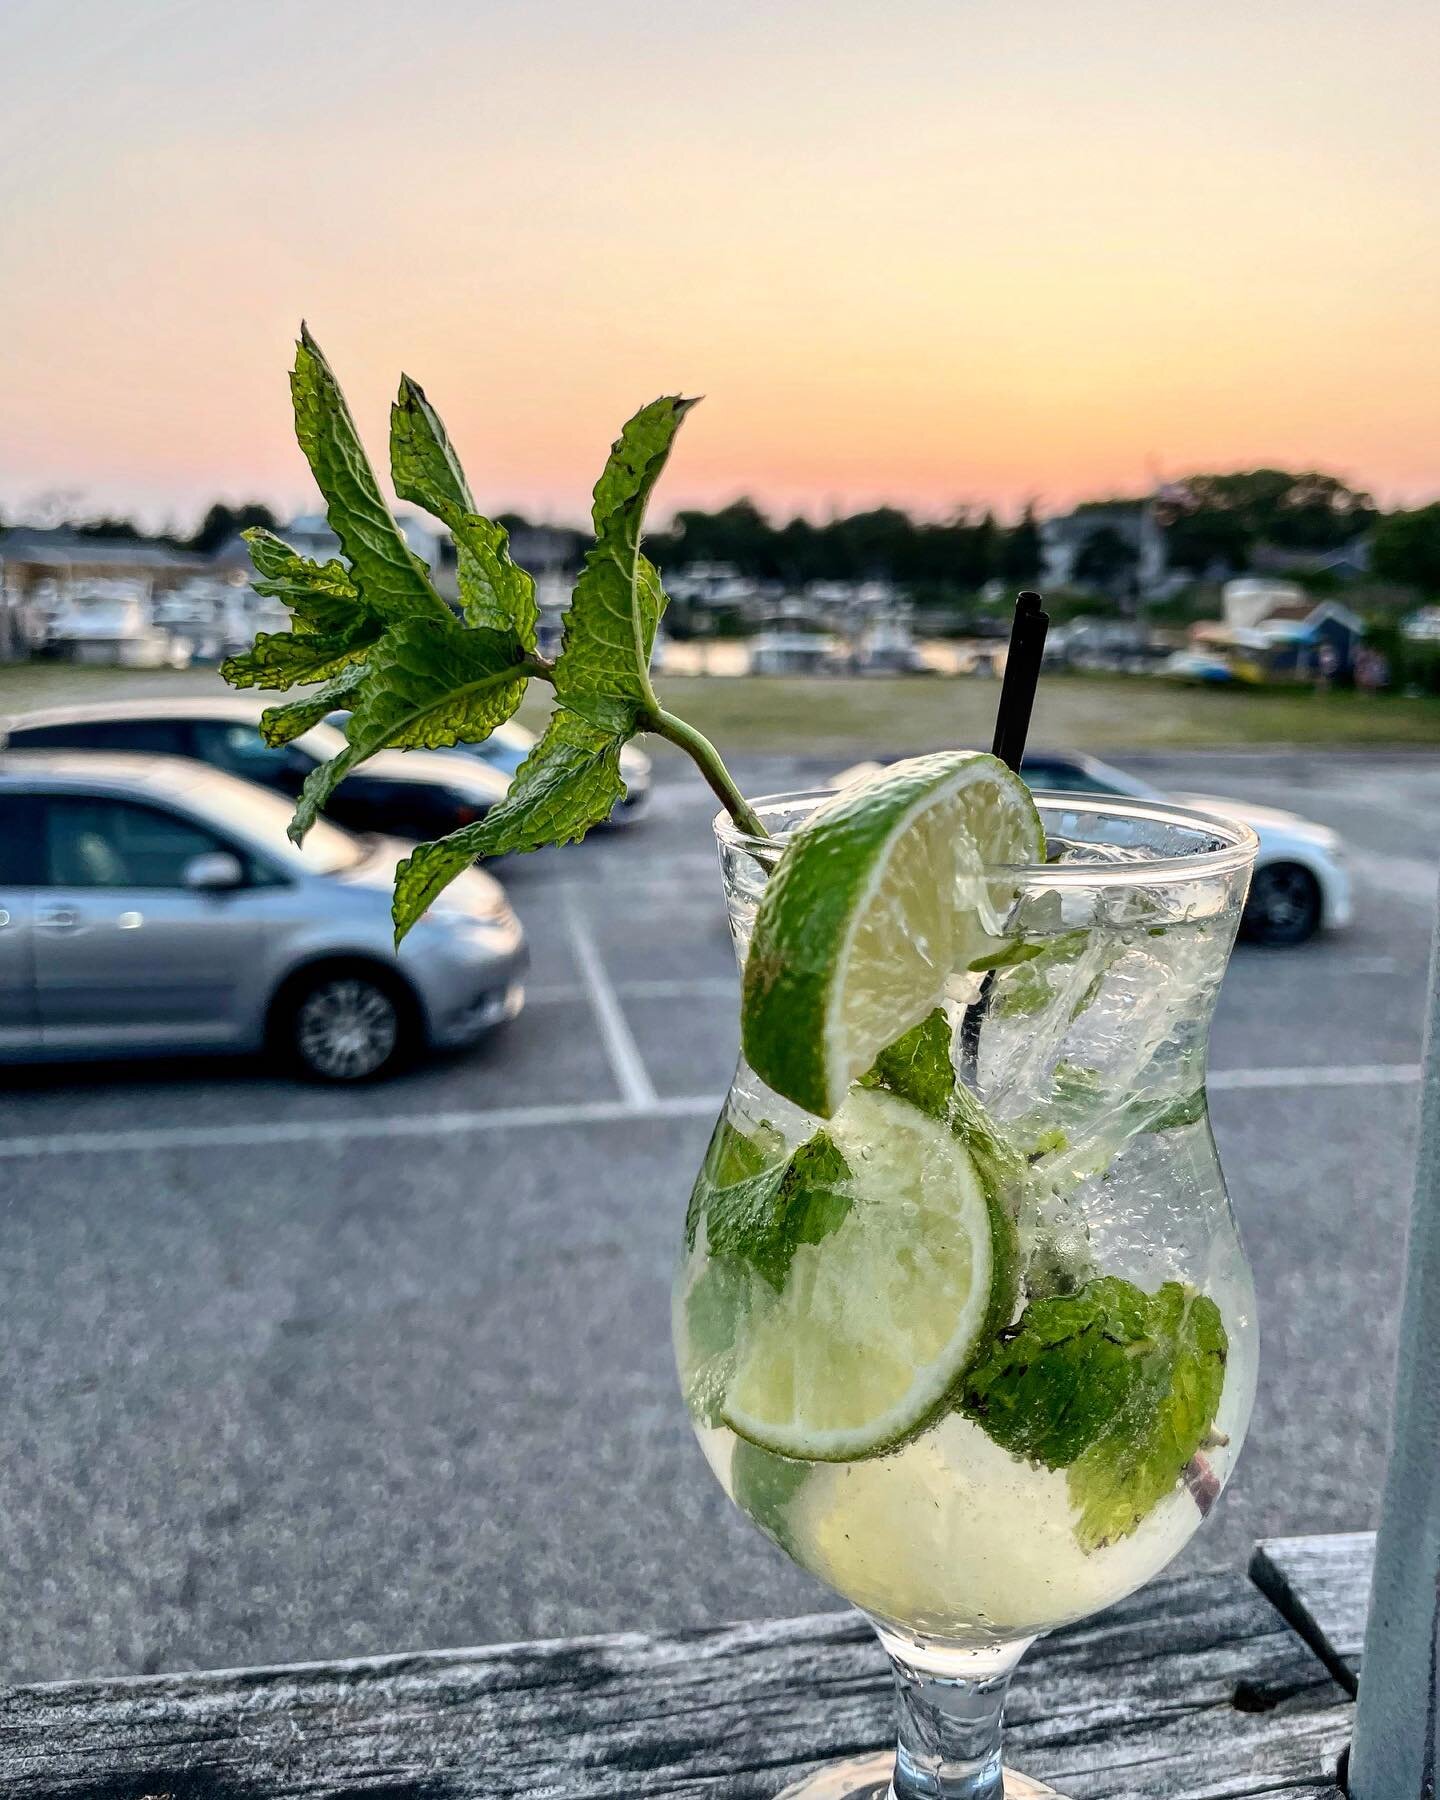 Mojitos made with fresh mint from our garden paired with a sunset you can&rsquo;t beat 🌅

#hamptonsnewyork #hamptonshappyhours #thehamptons #hamptonbays #refreshingcocktails #longislandeats #freshmint #hamptonslife #deliciouscocktails